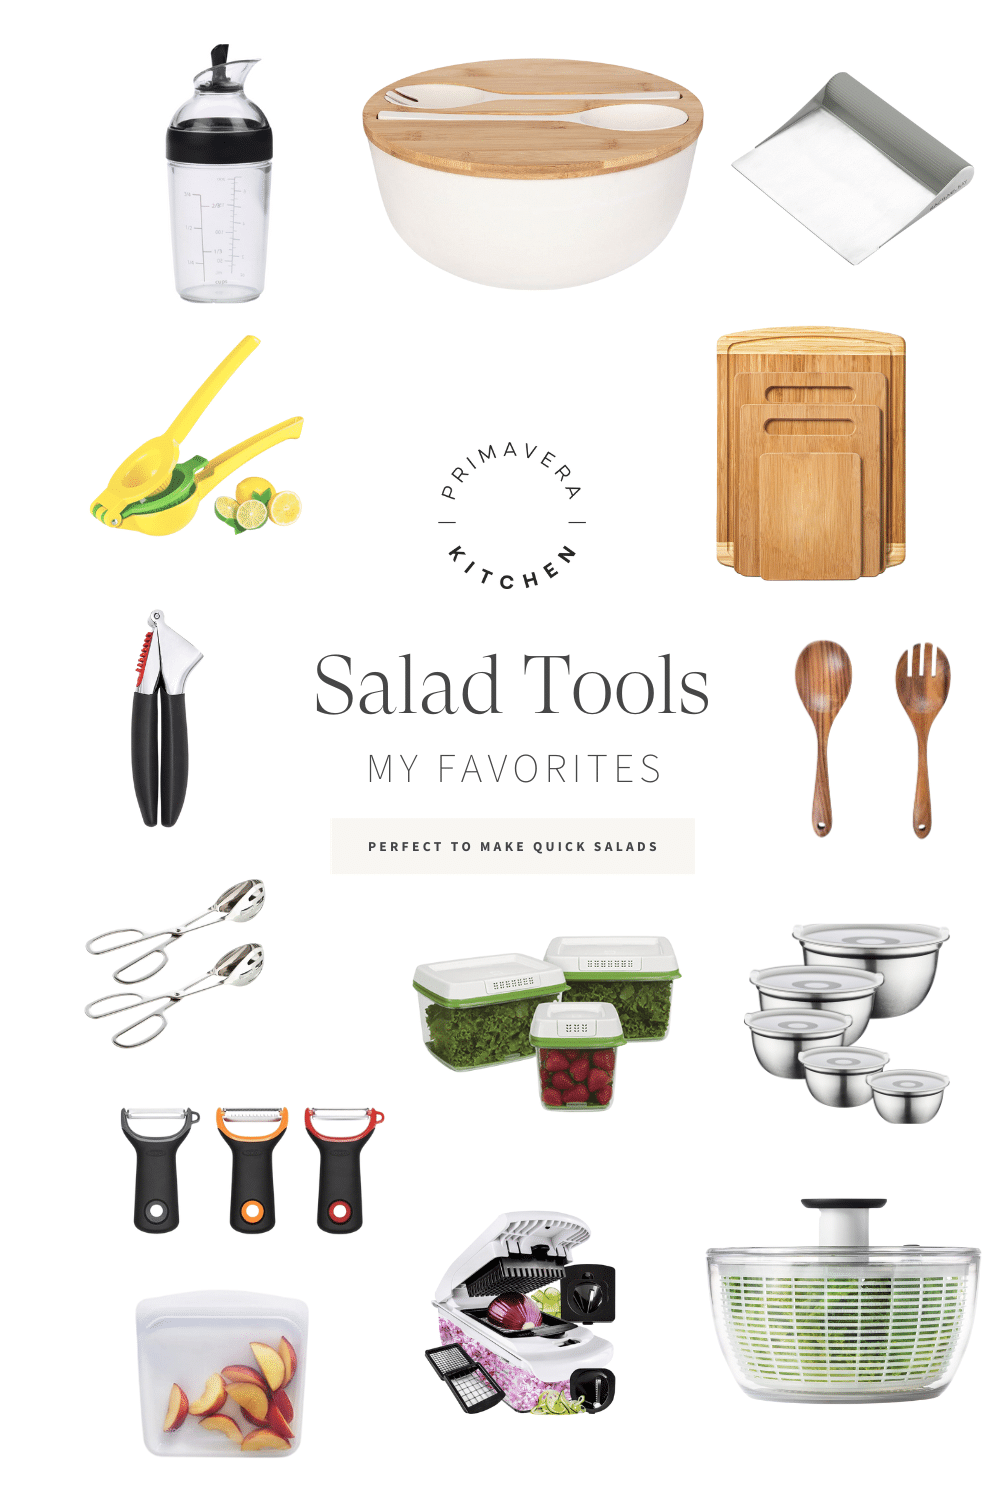 Titled Photo Collage (and shown): Salad Tools